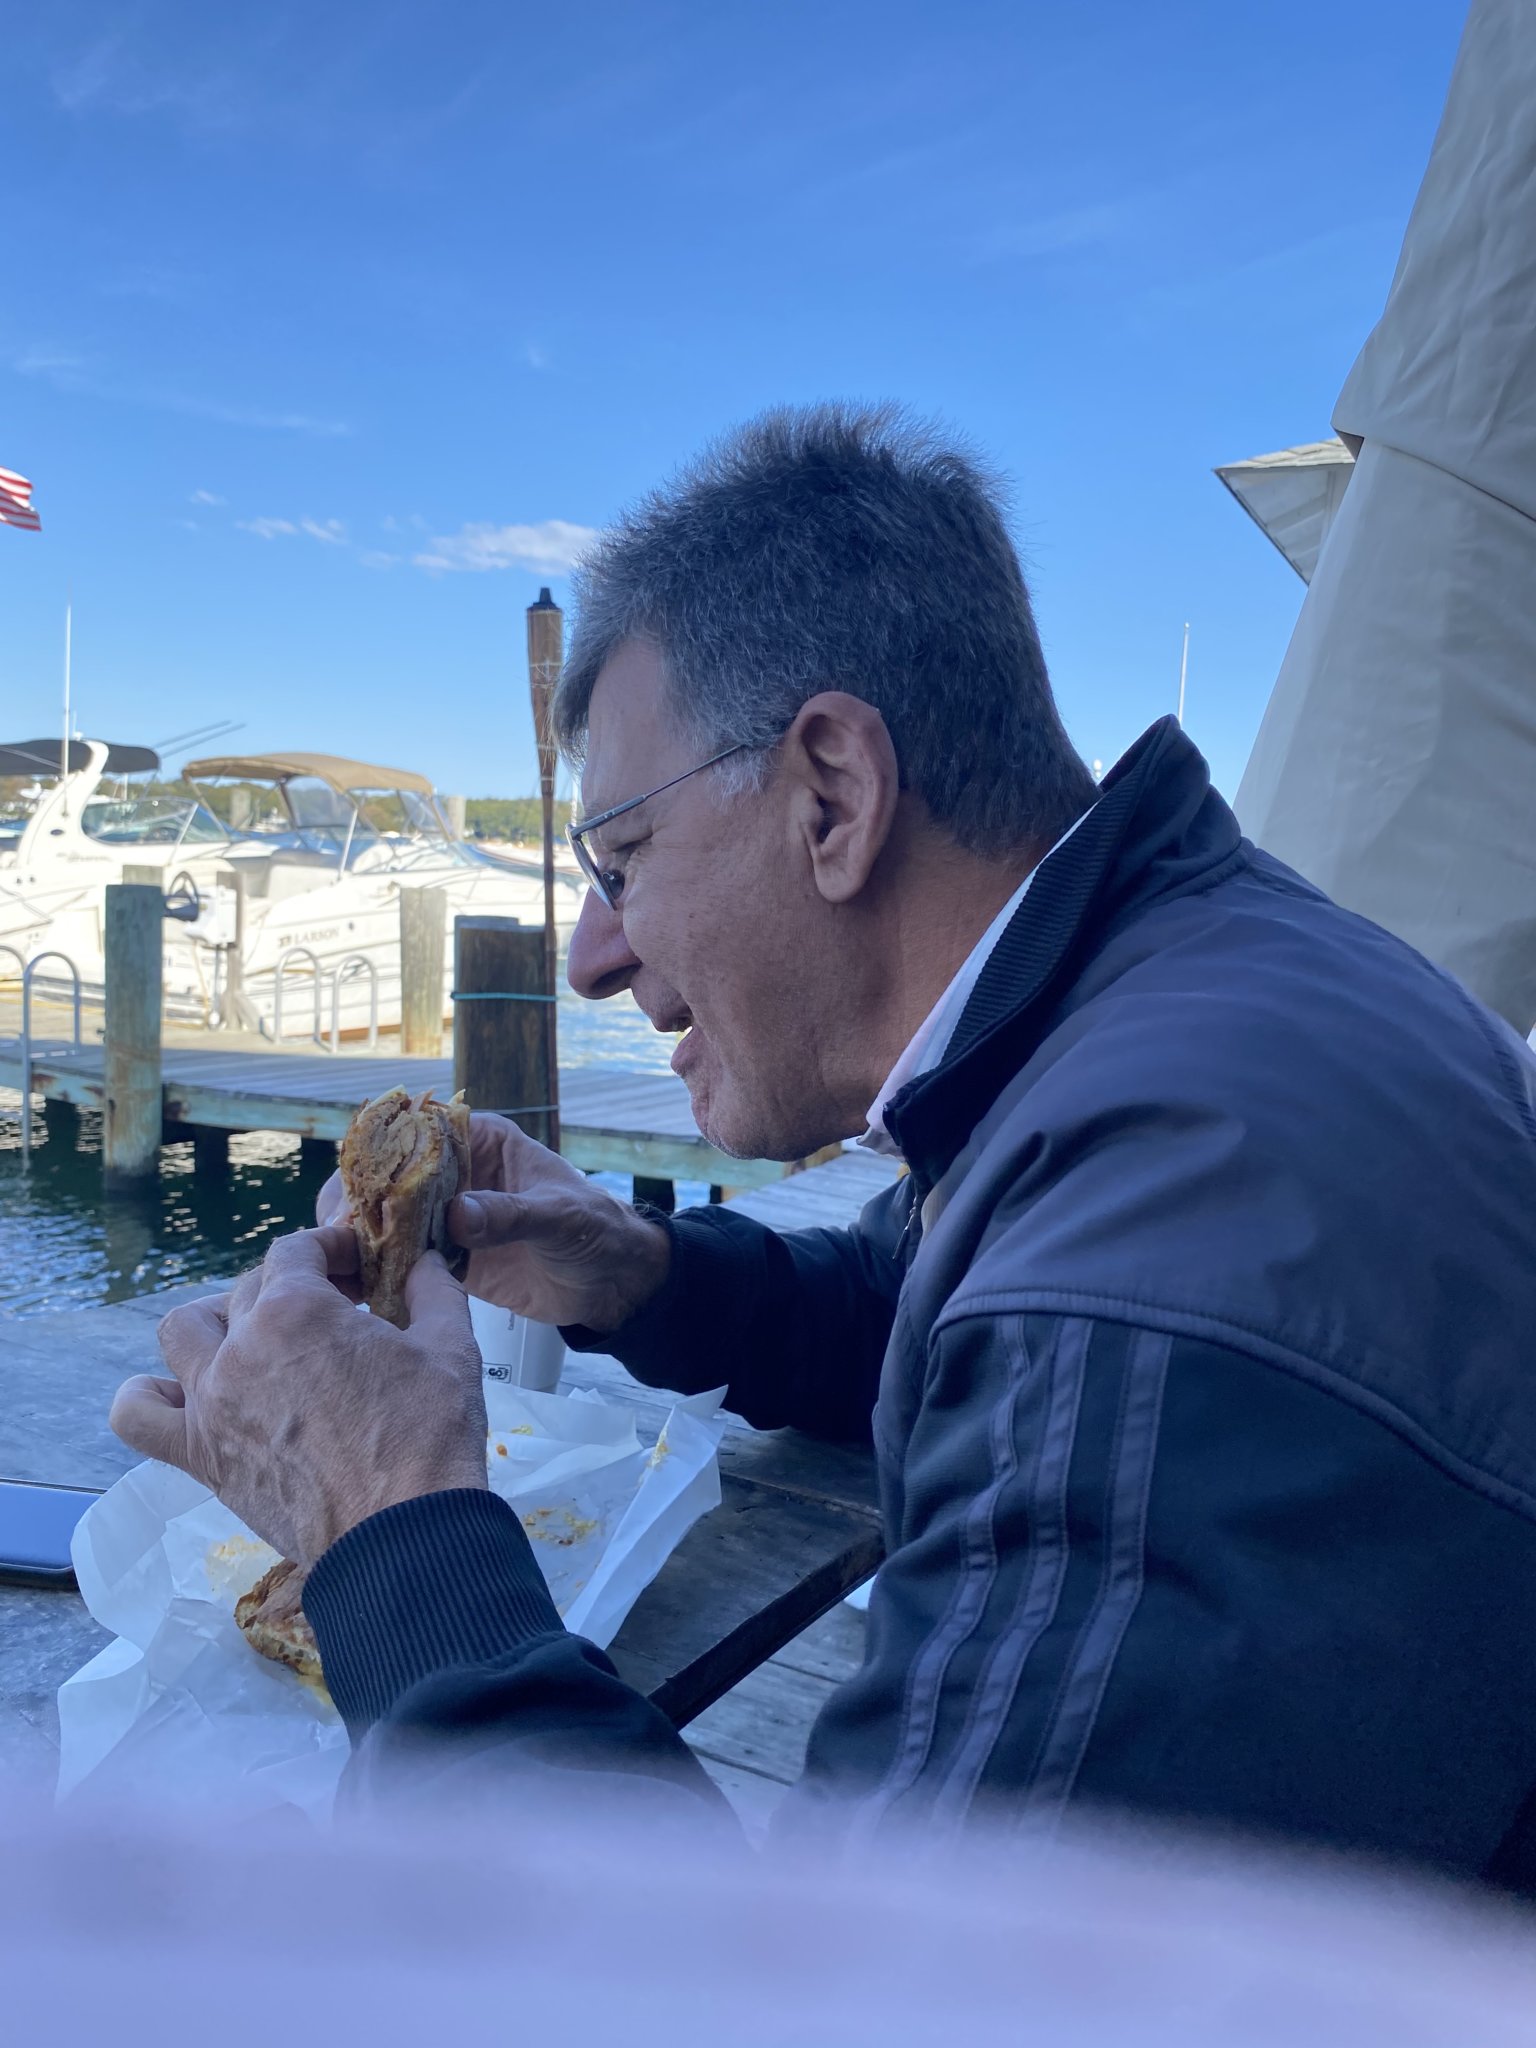 Roman takes a bite of “The Cuban” sandwich, which is now a favorite of mine, too!